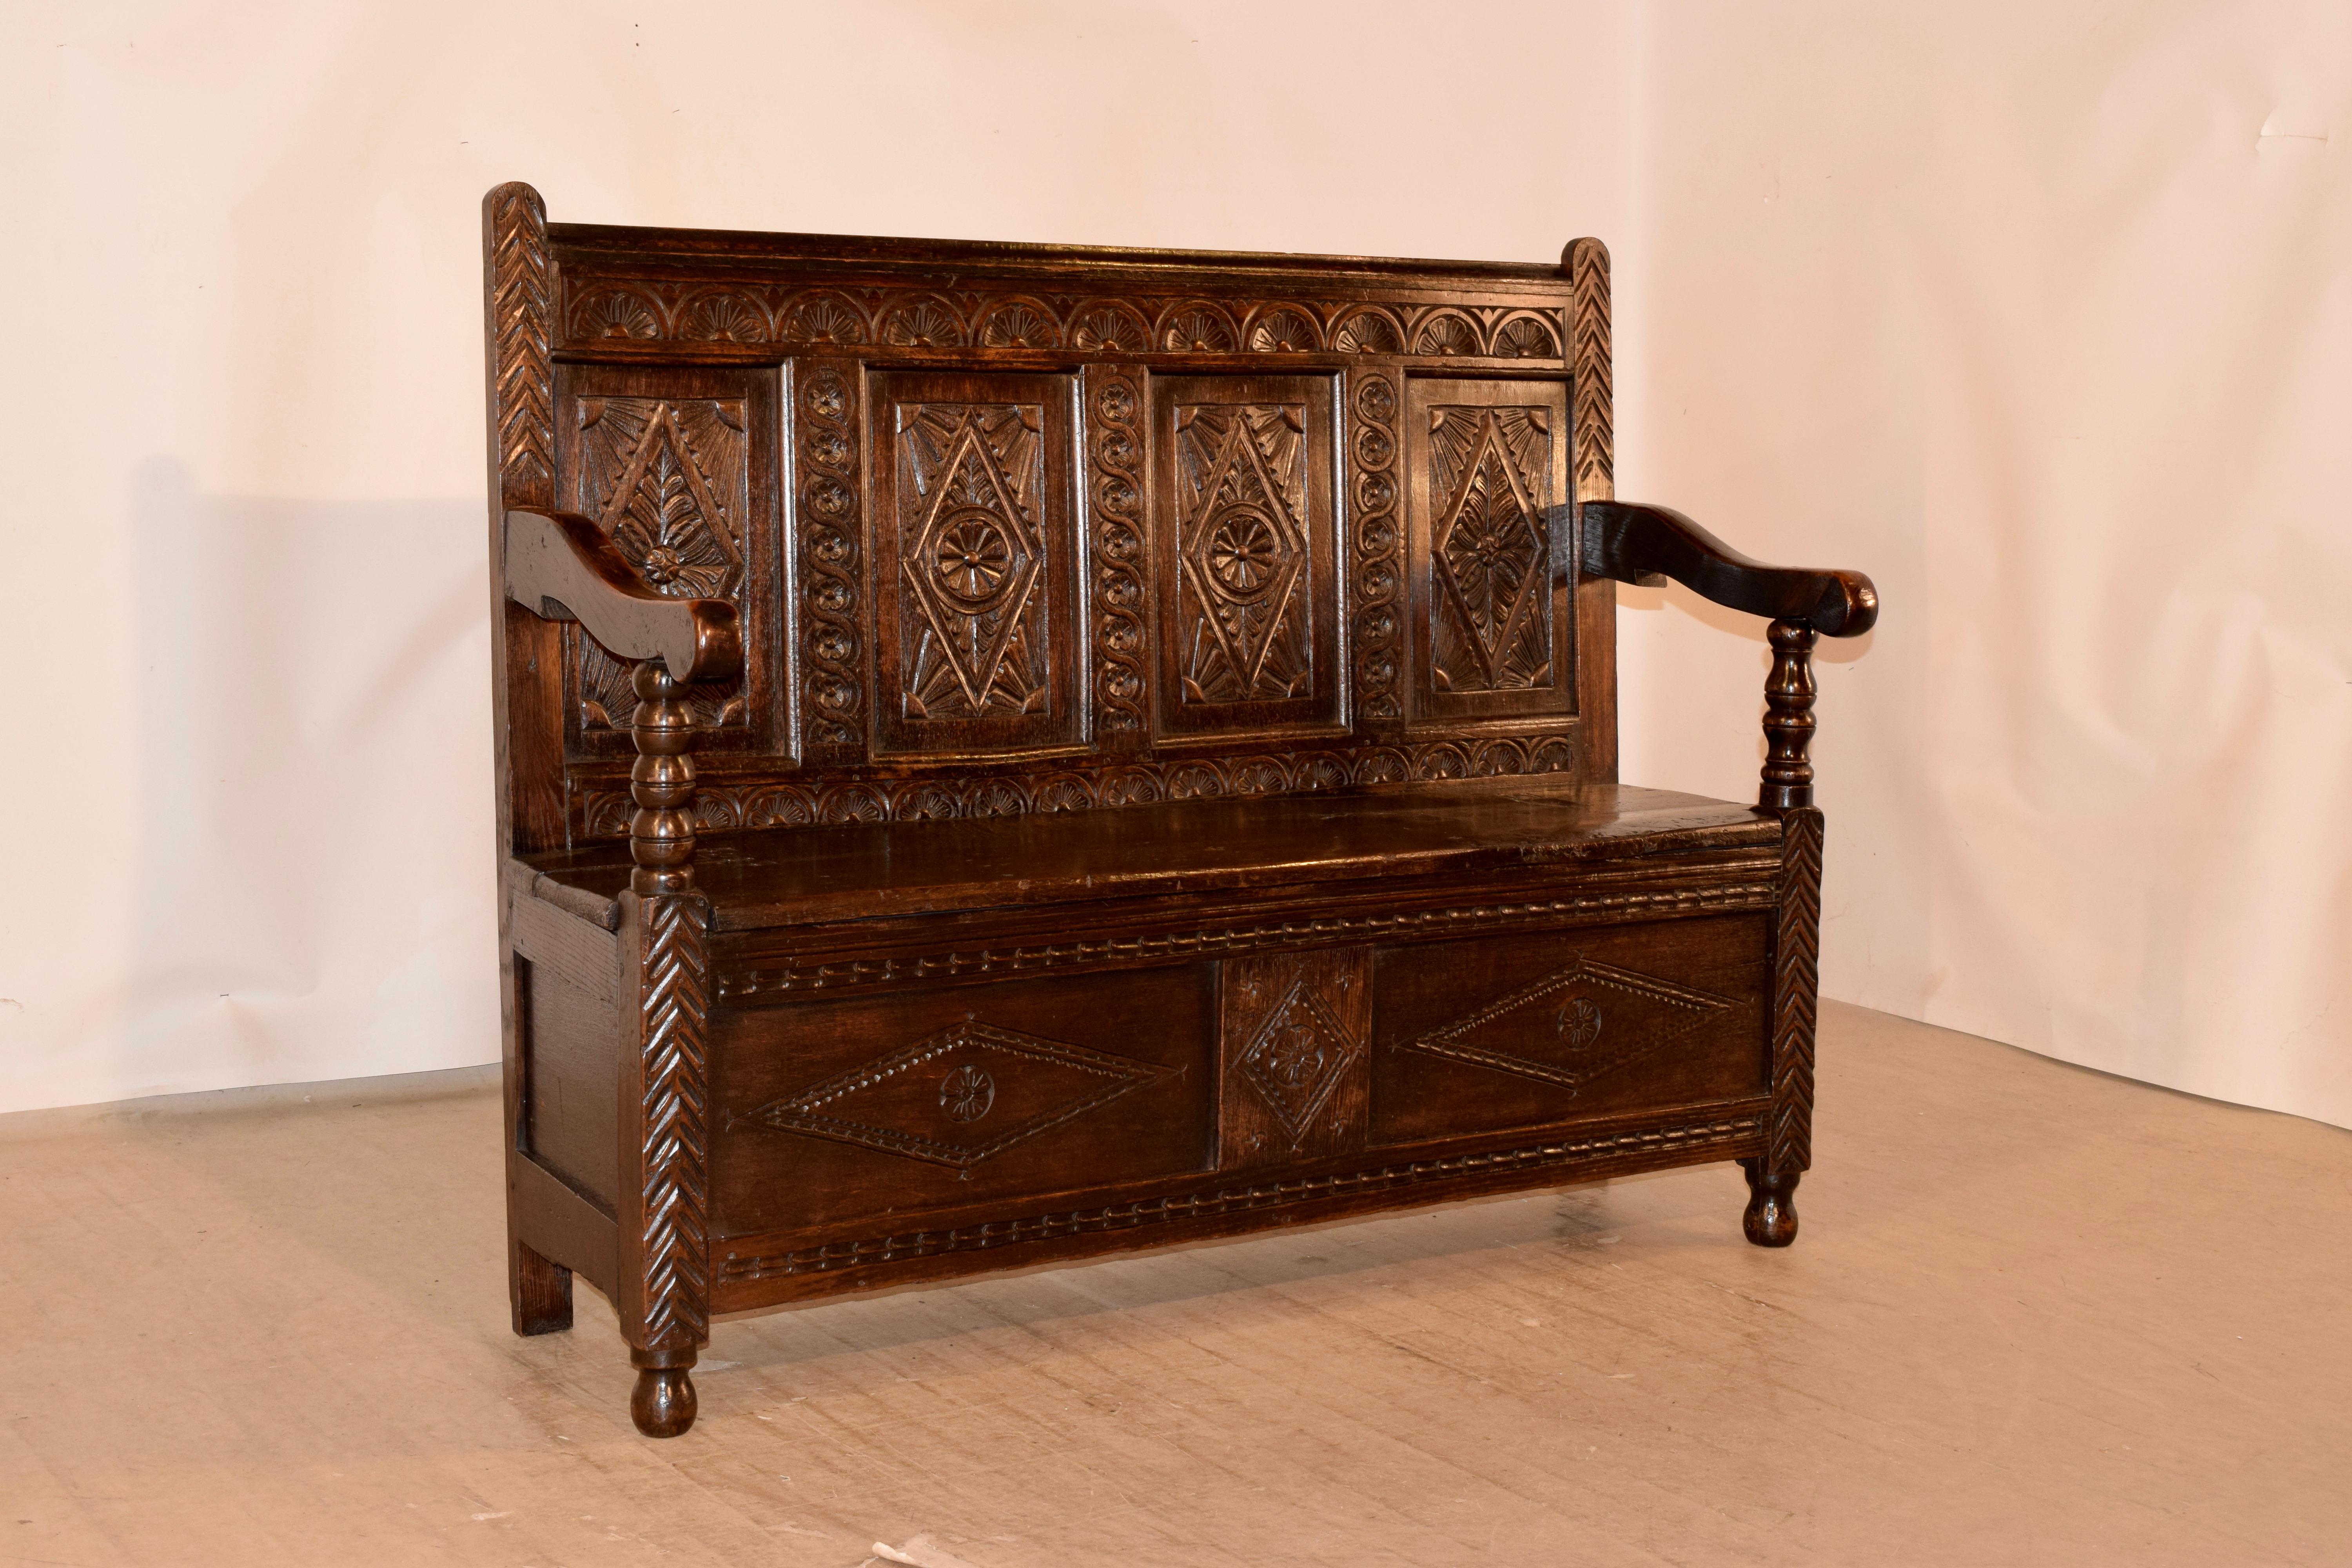 c. 1720 English oak bench with a wonderfully hand carved decoration. The top is decorated with hand carved lunettes, following down to four panels, all with carved cartouches surrounded by accented carvings, flanked by guilloche carvings, over